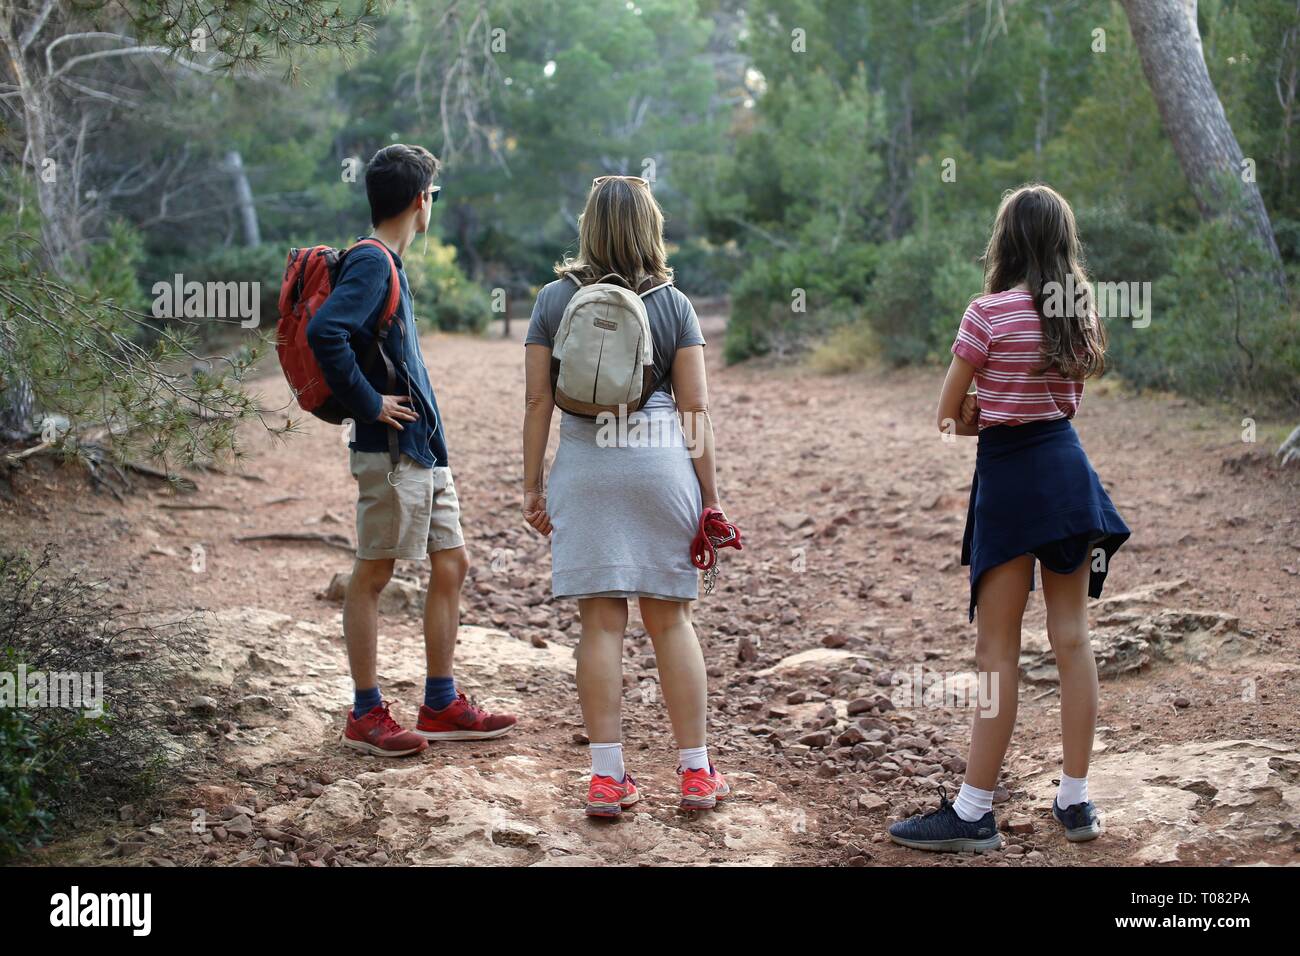 Back view of Mum and teenage boy and girl on a hike looking at something in the forest. Stock Photo